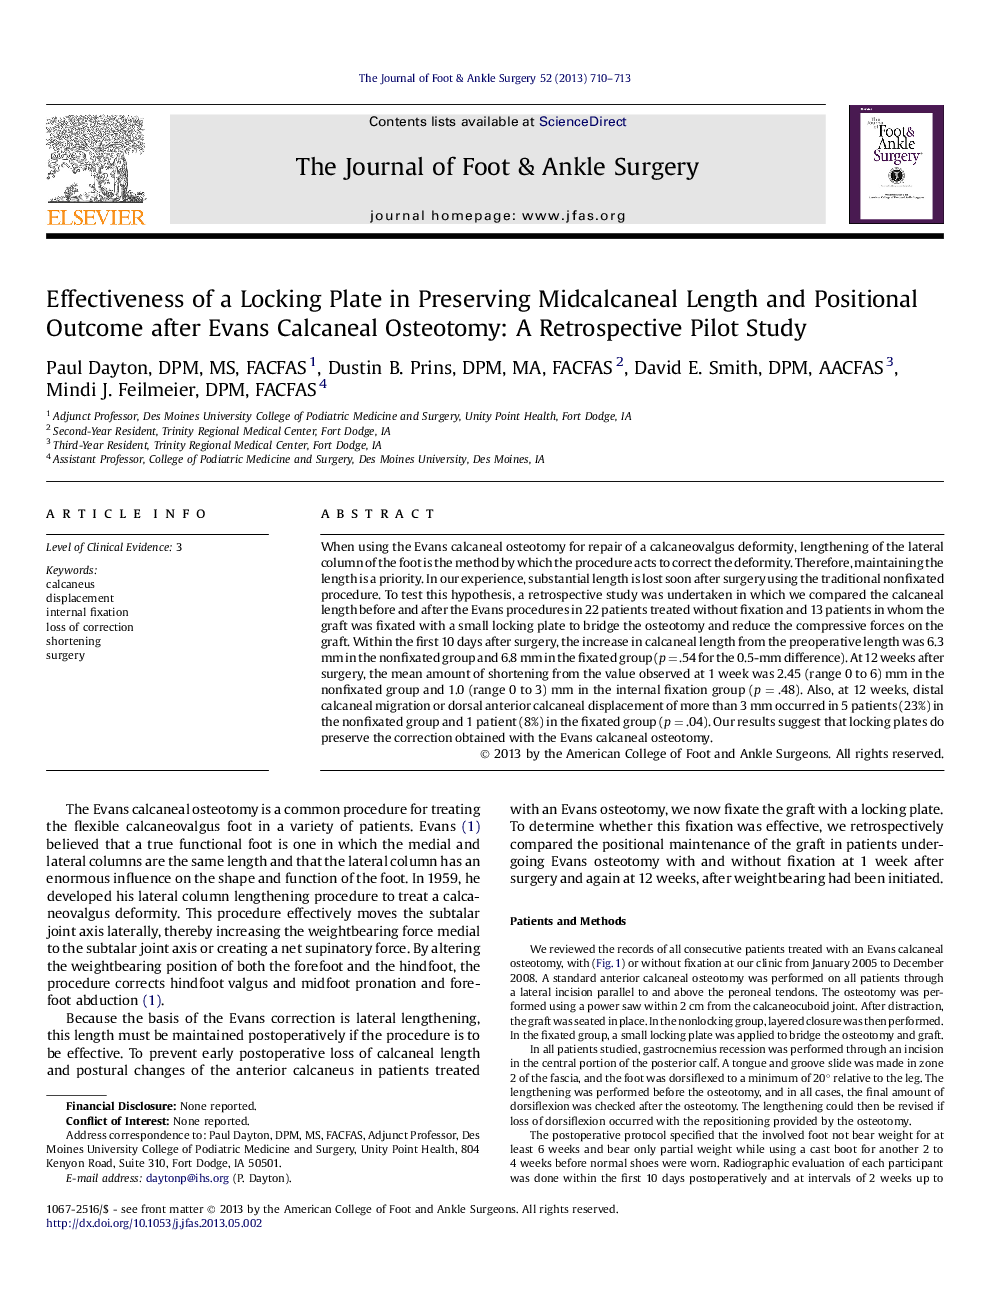 Effectiveness of a Locking Plate in Preserving Midcalcaneal Length and Positional Outcome after Evans Calcaneal Osteotomy: A Retrospective Pilot Study 